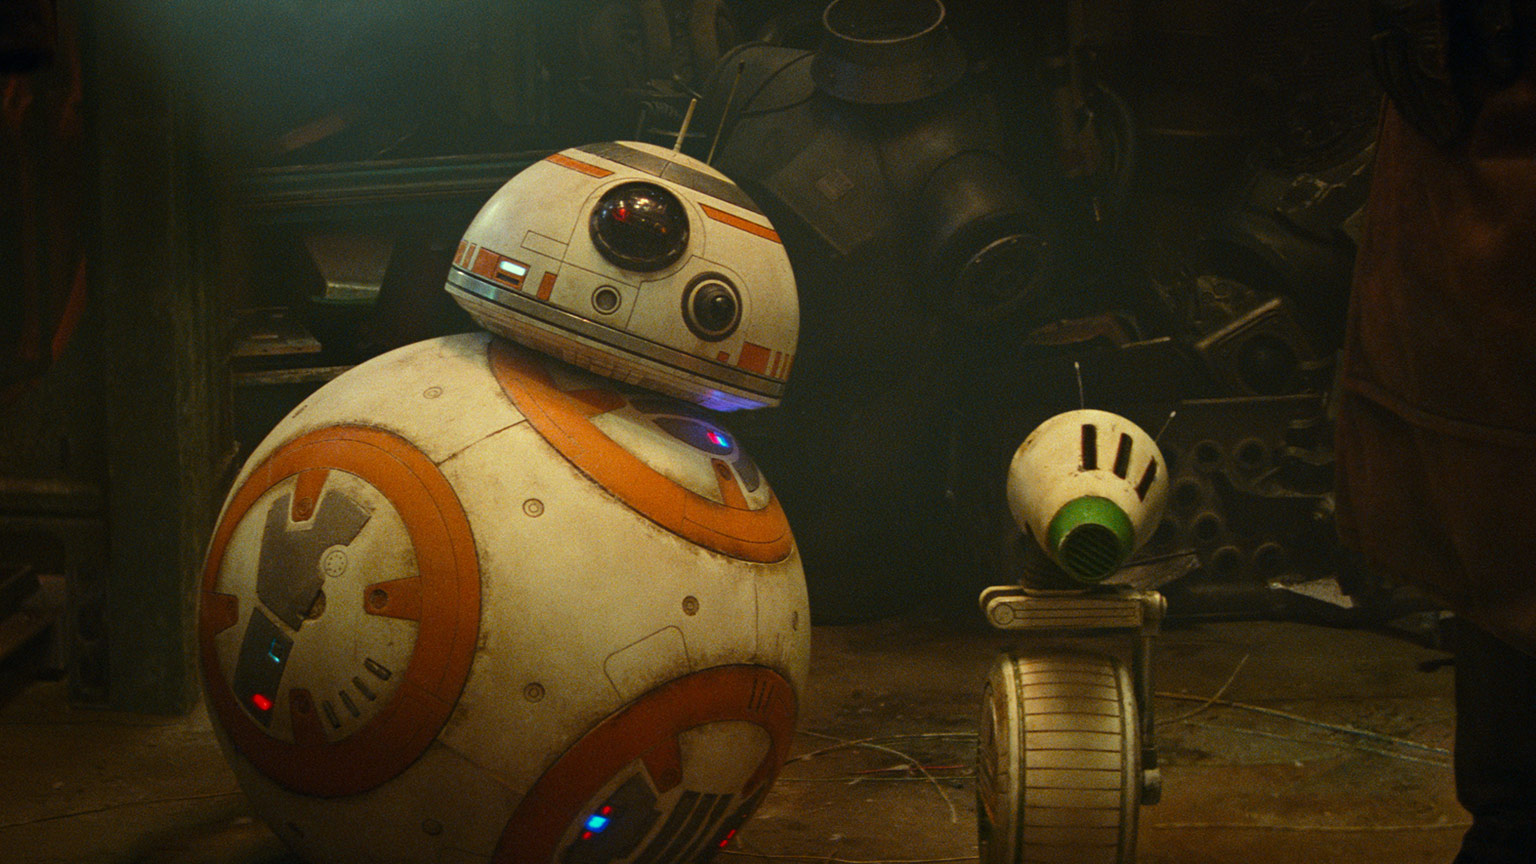 20 of the Star Wars Galaxy’s Greatest Droids